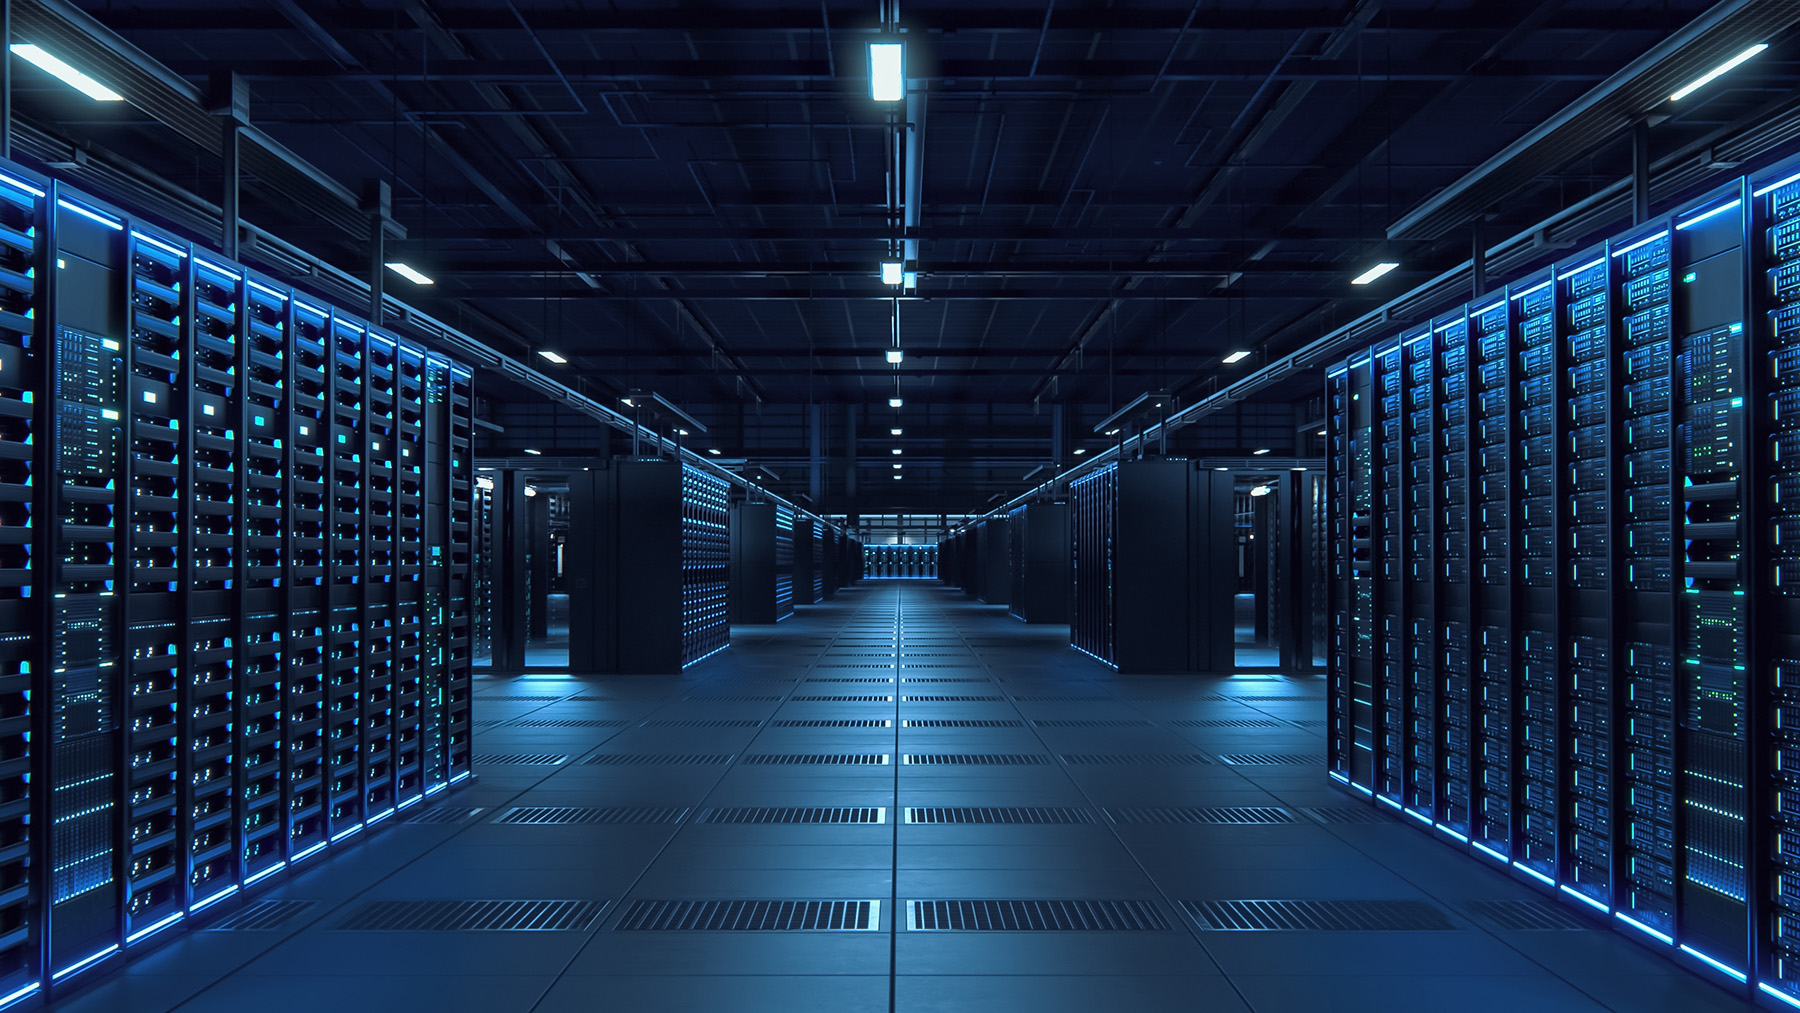 Rows of servers, bathed in blue light, stand ready to support the digital world. 